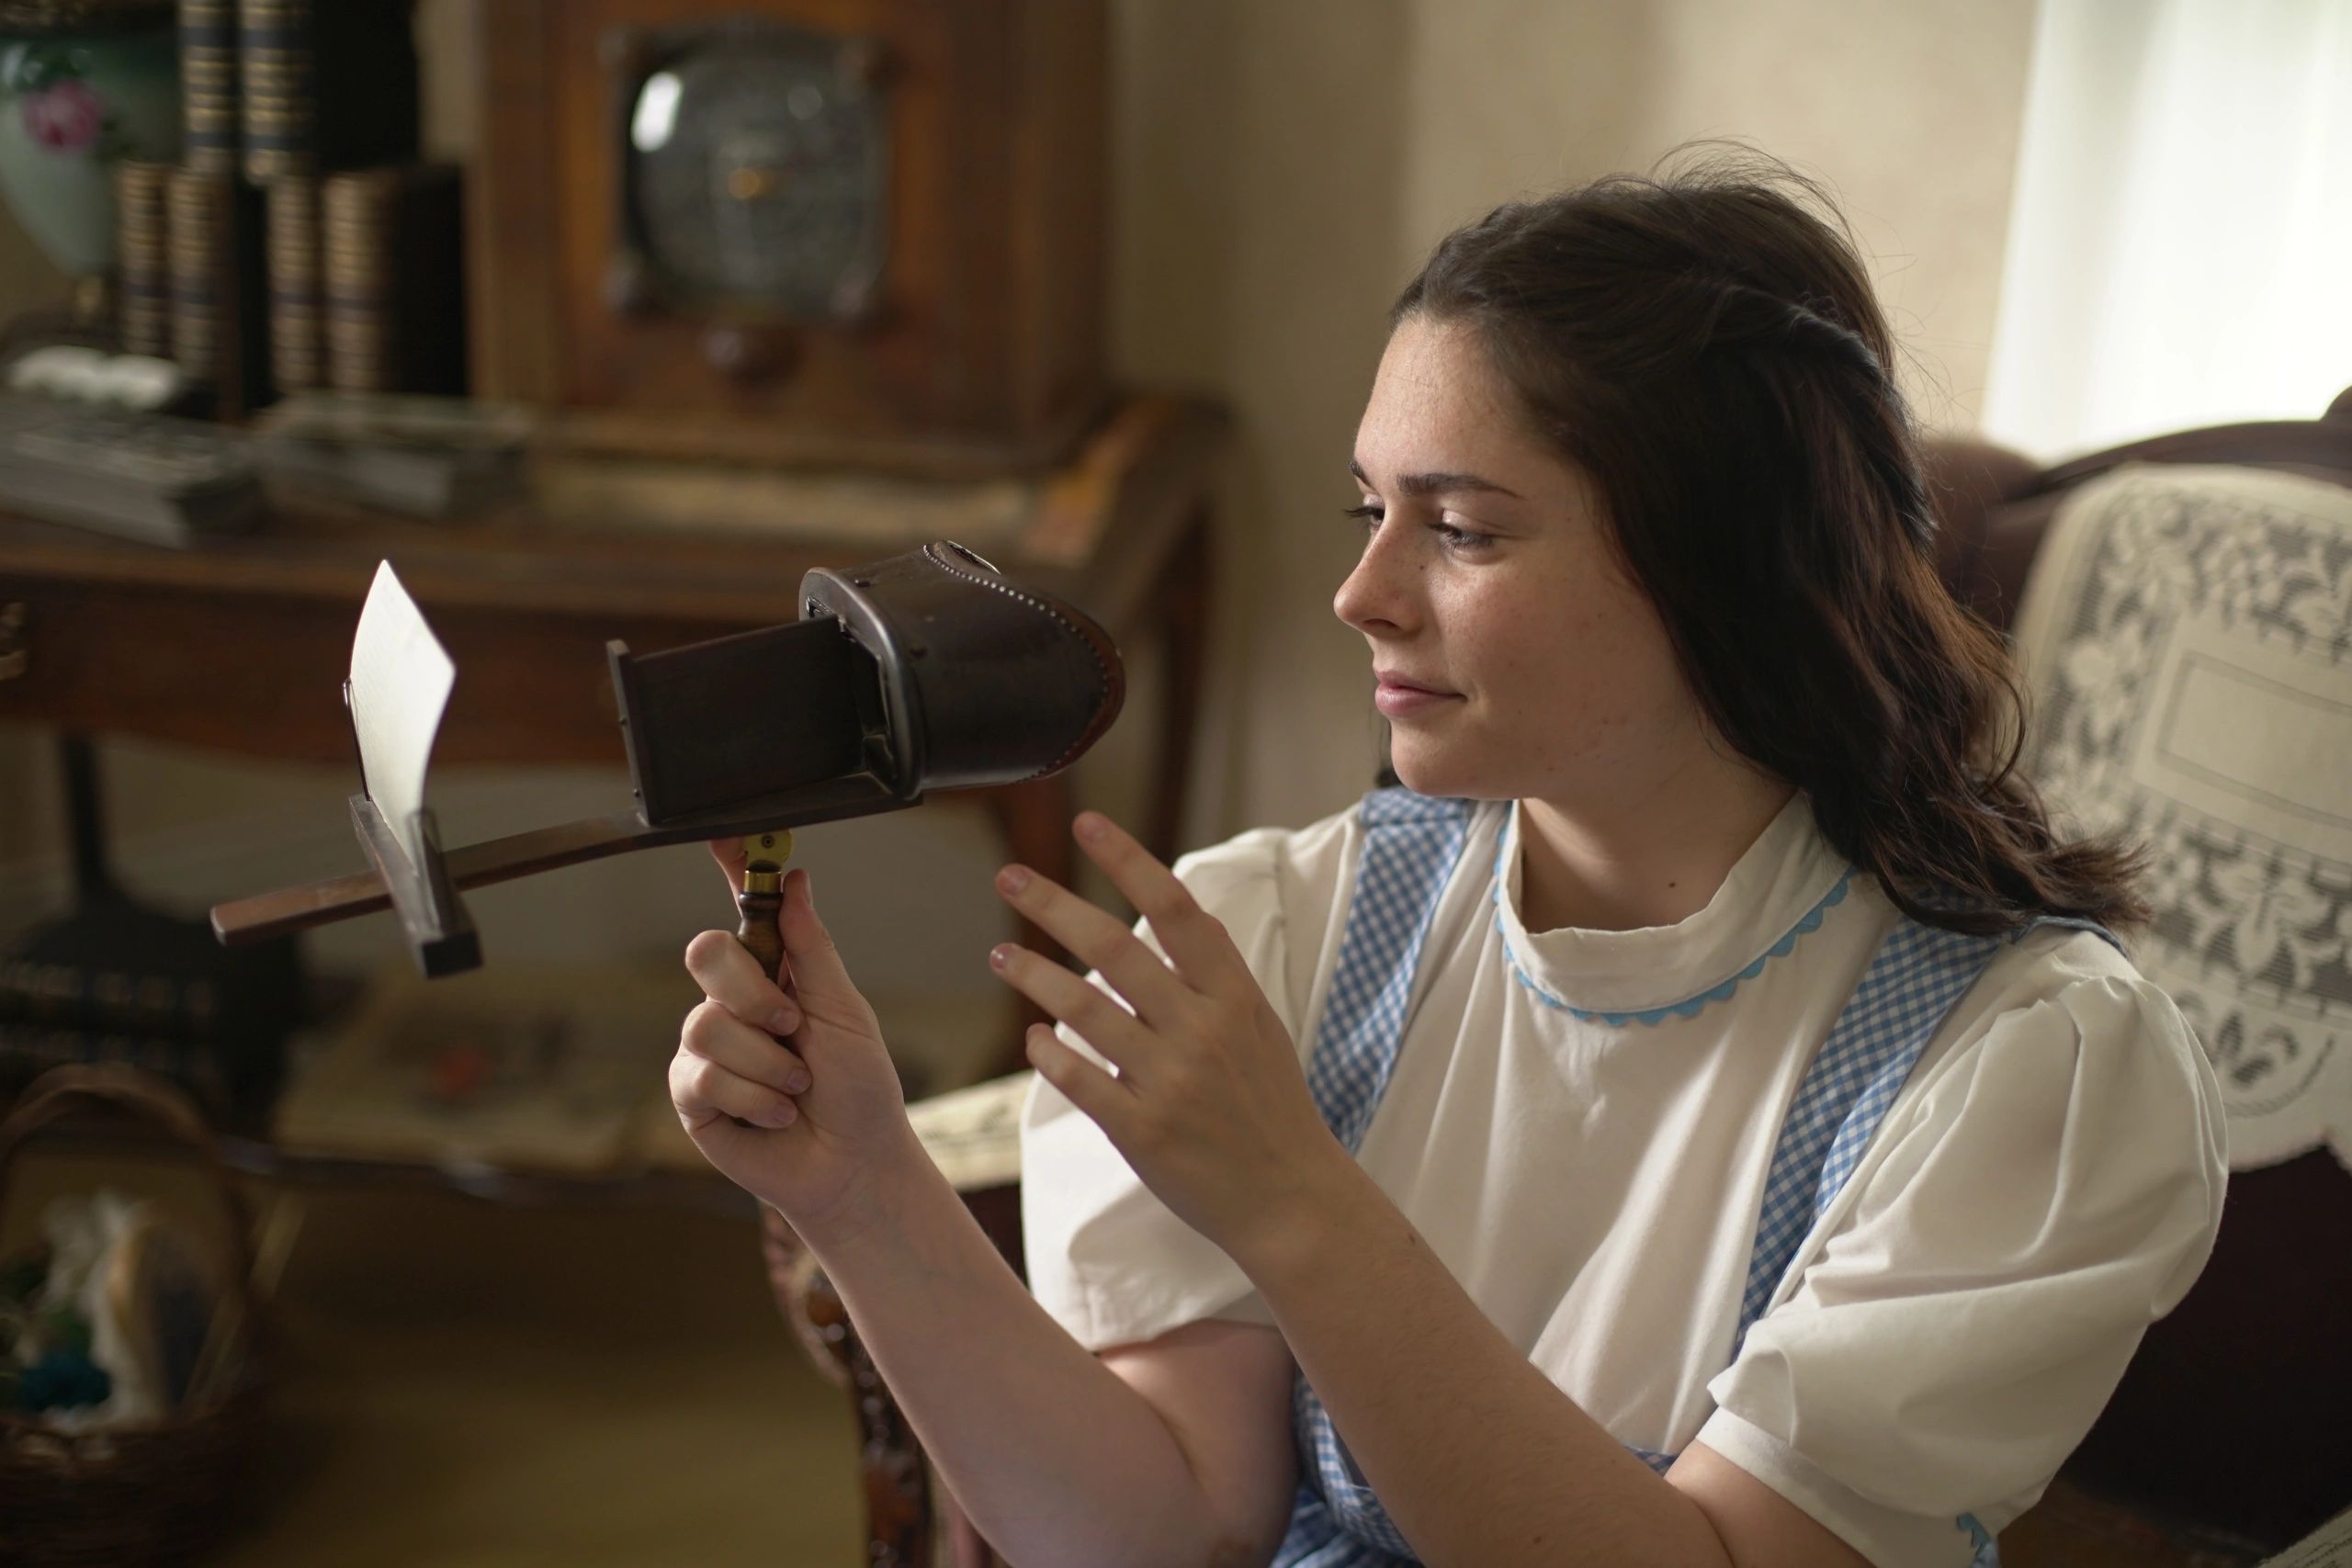 A Dorothy tour guide shows off an antique stereoscope inside Dorothy's House